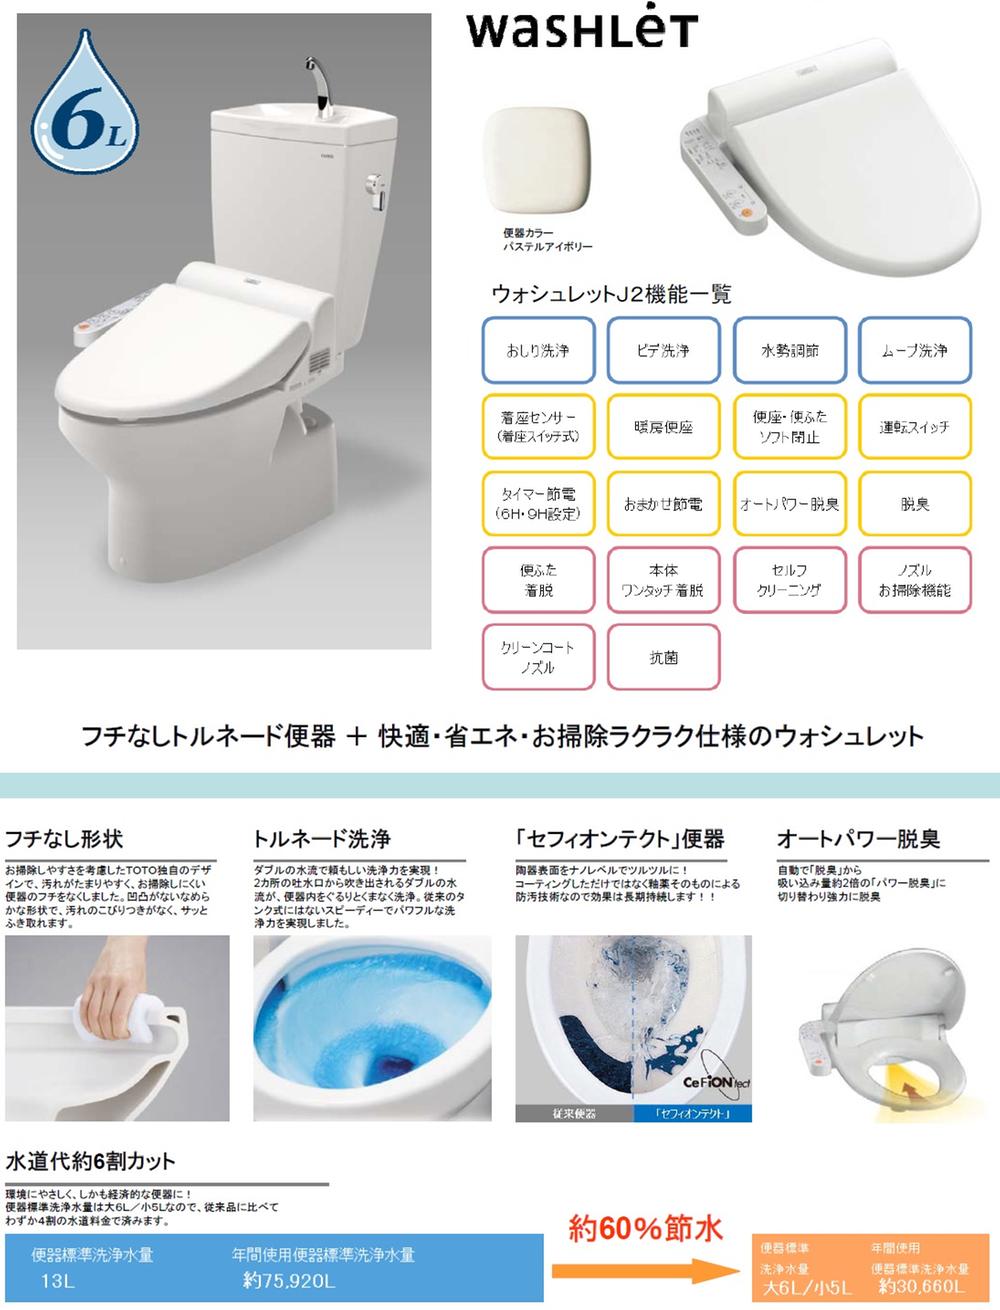 Same specifications photos (Other introspection).  ■ TOTO made of toilet ■  ・ Borderless shape in consideration of the cleaning ease ・ Tornado cleaning to wash all over the inside of the toilet bowl in the double of water flow ・ The pottery surface was coated in slippery at the nano-level "Sefi on Detect" toilet bowl ・ Own